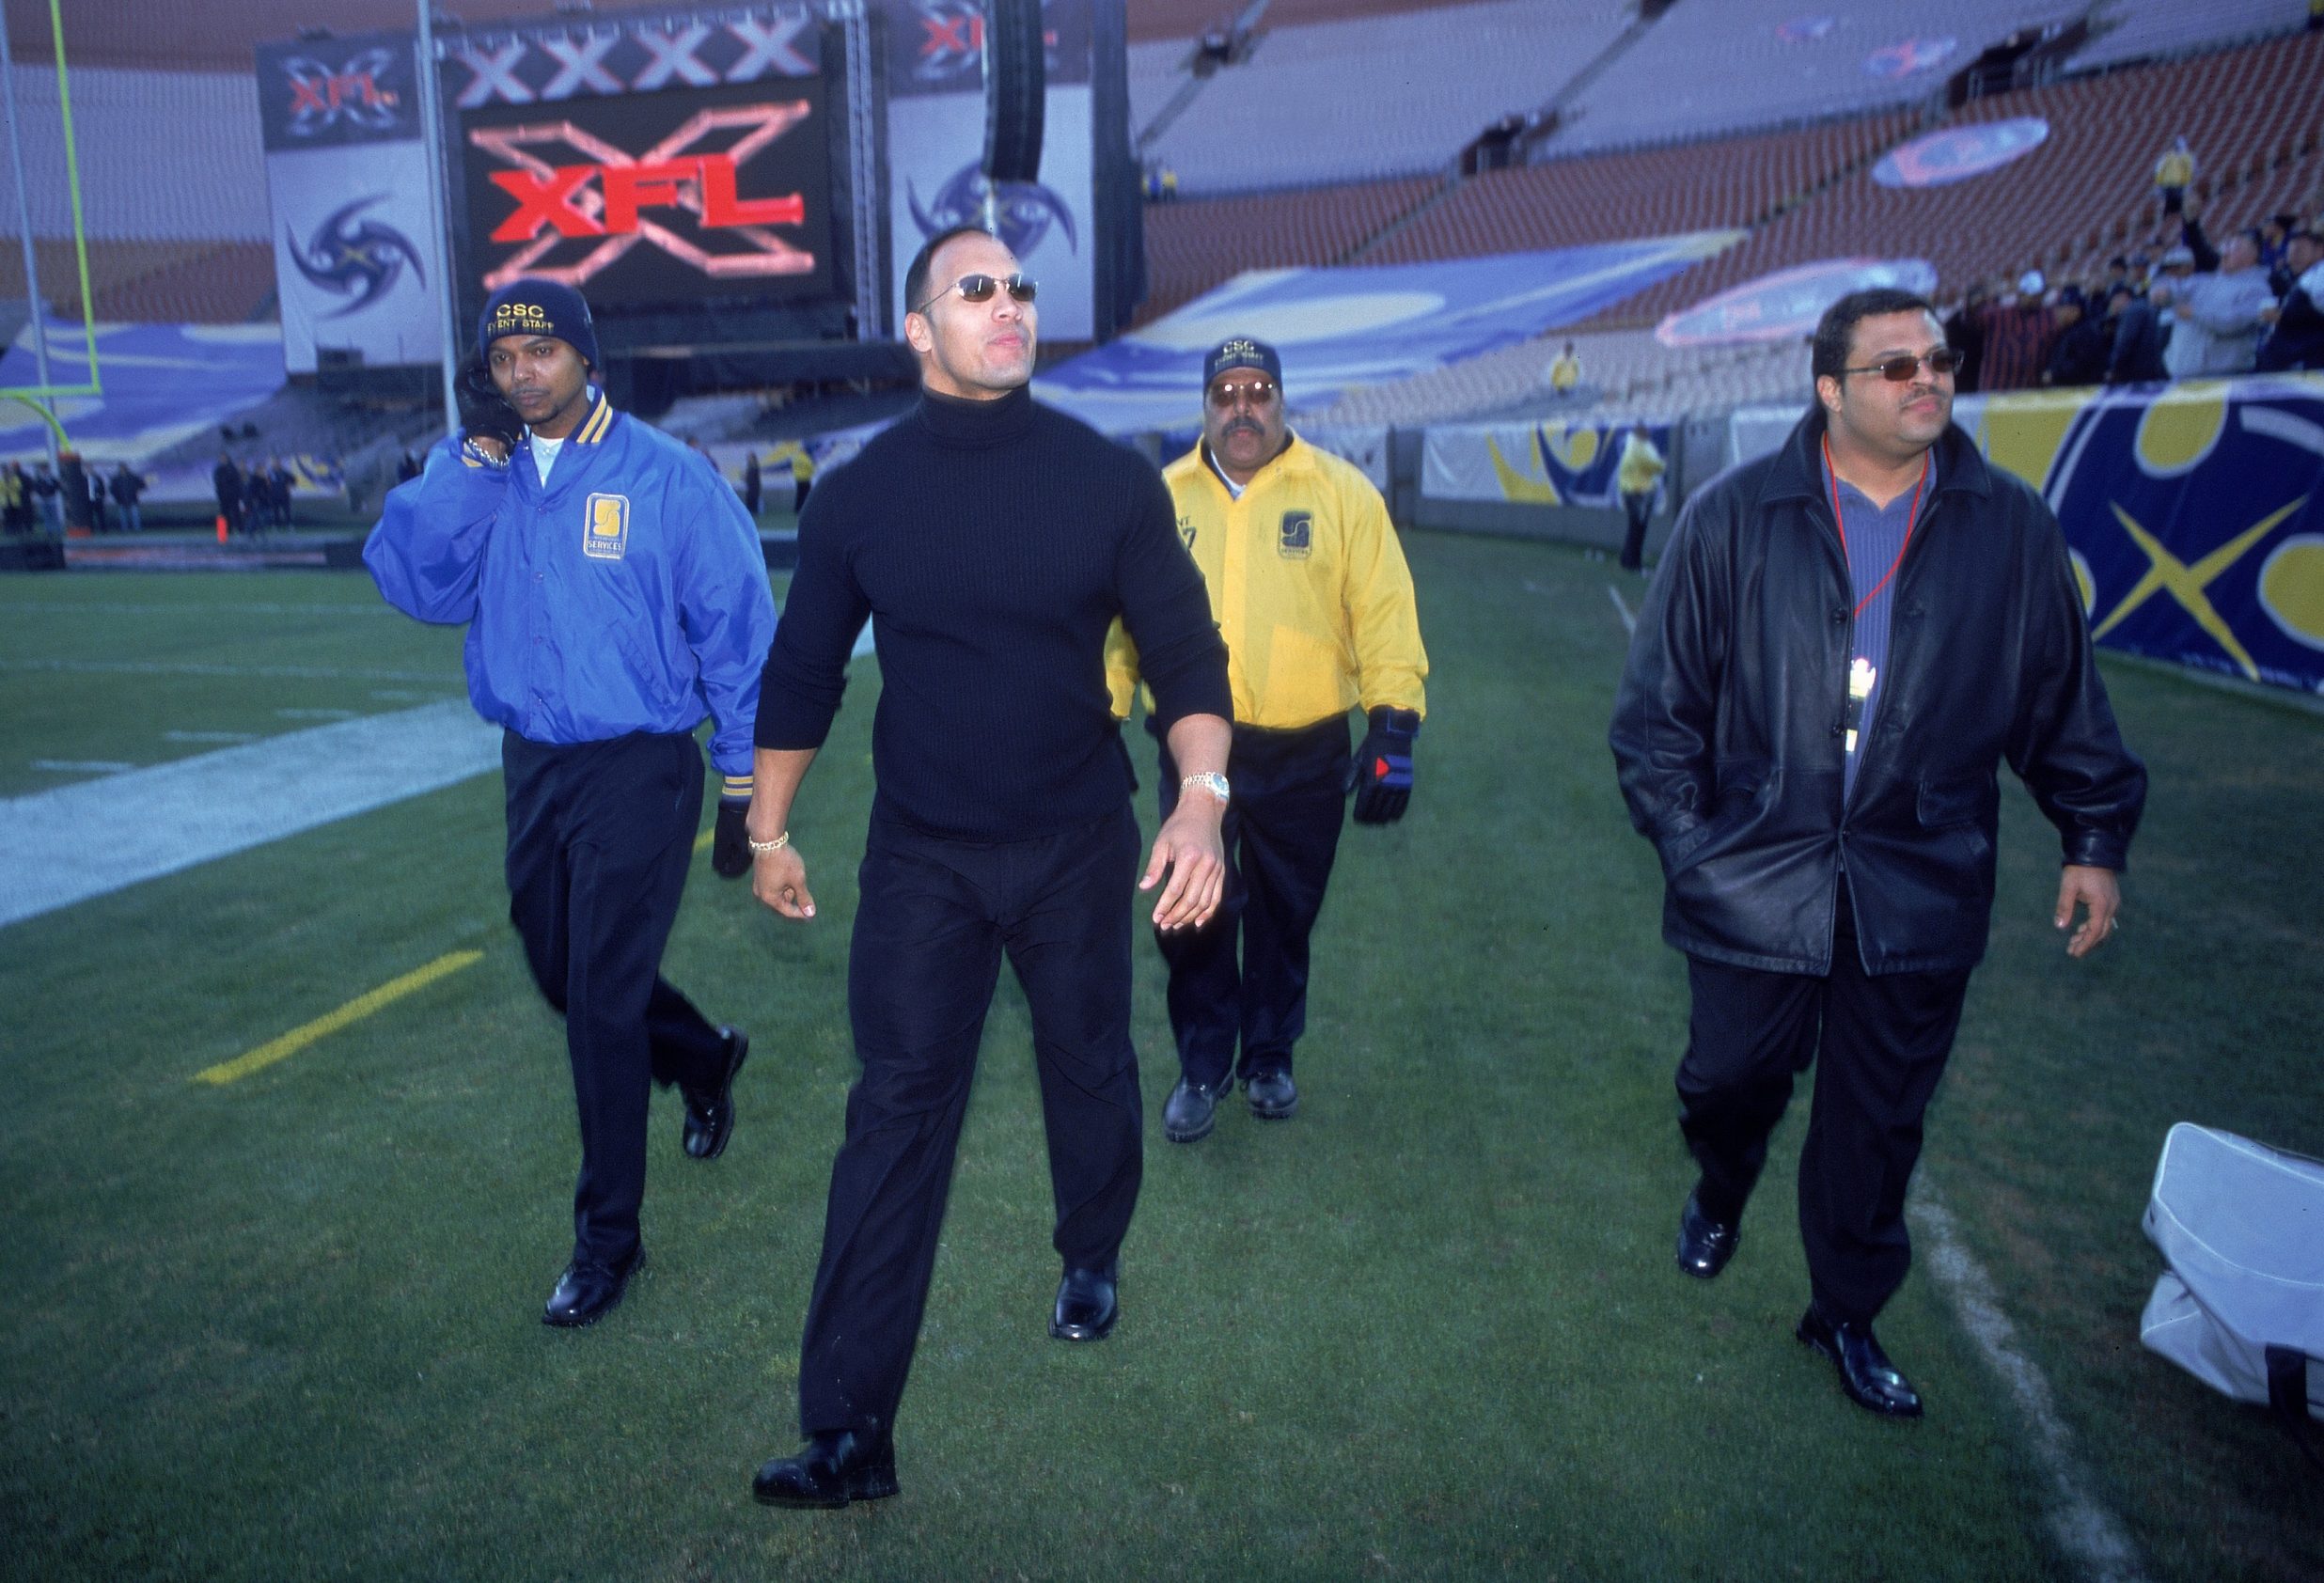 The Rock greets fans before an XFL game